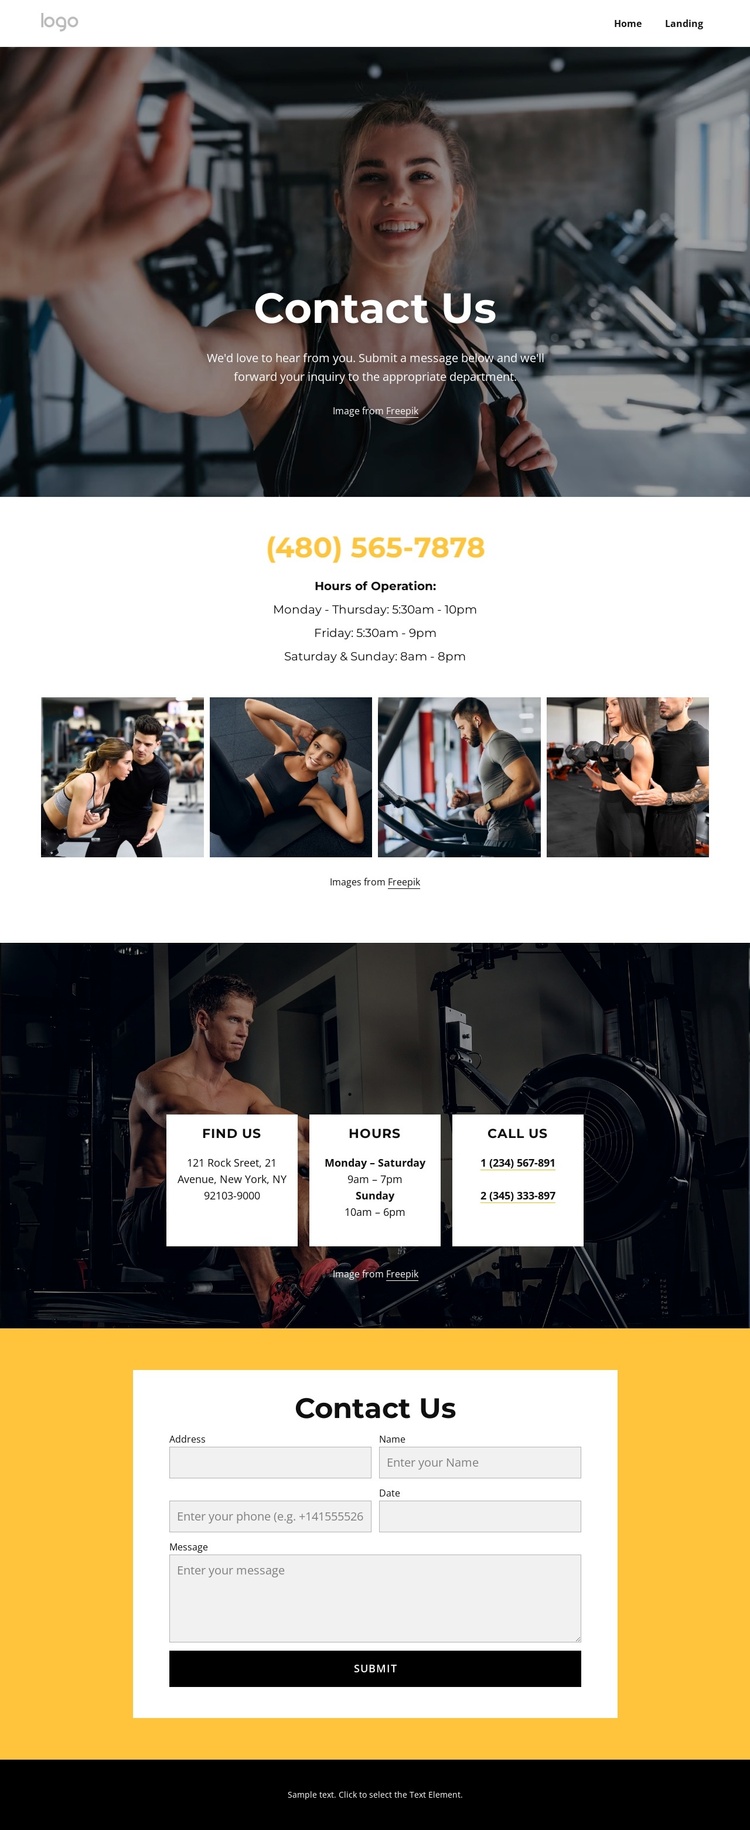 Personal training, group classes Joomla Template